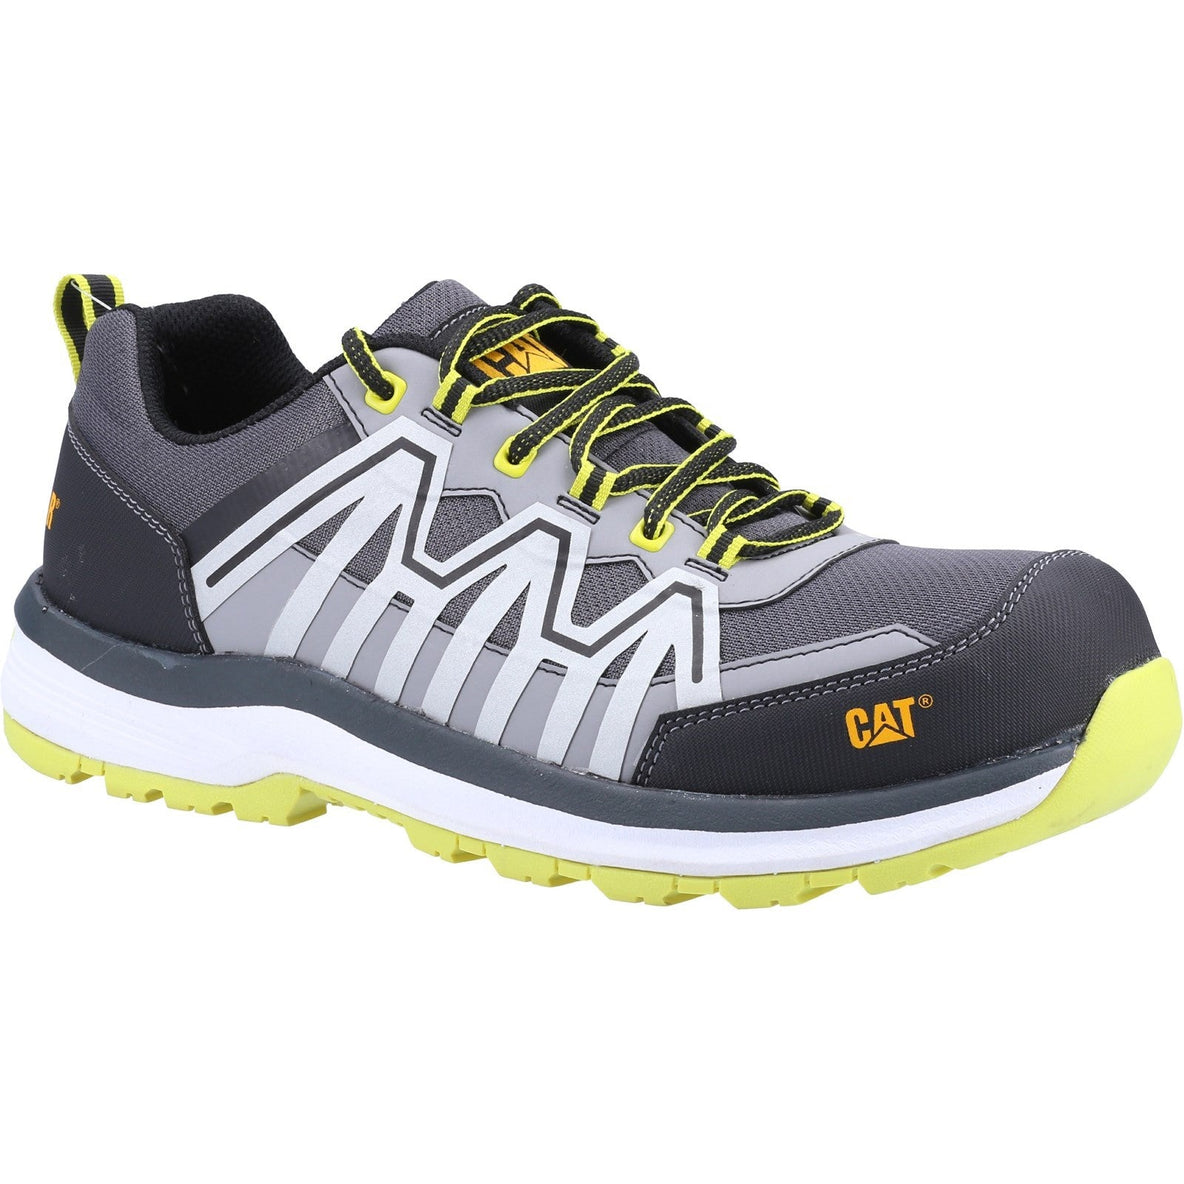 Caterpillar Charge S3 Safety Trainer in Black/Lime Green 